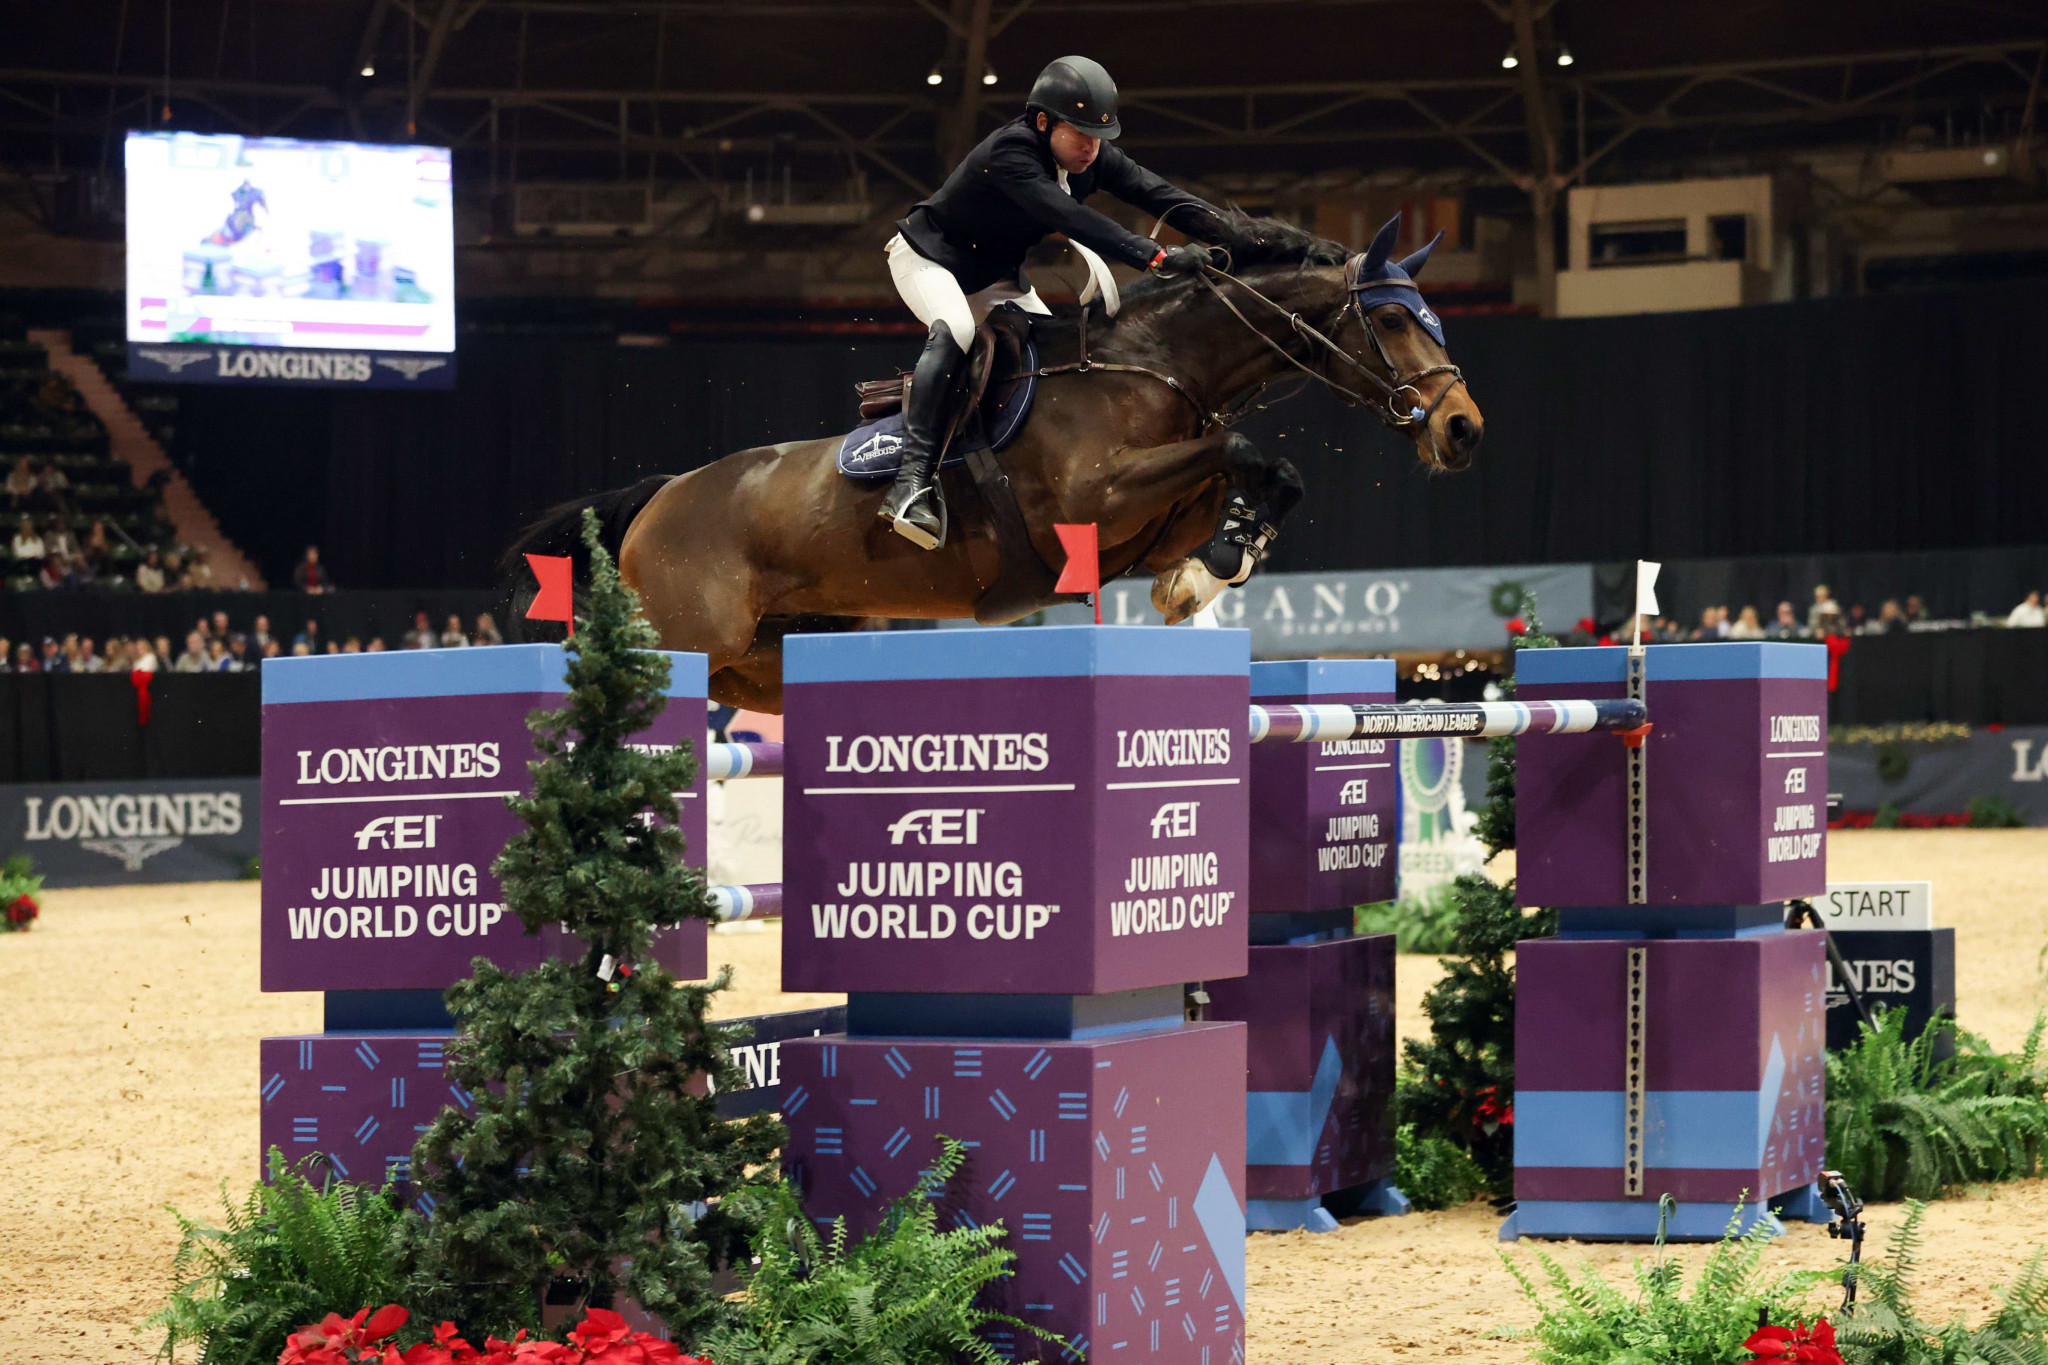 Swail wins third North American League Jumping World Cup event of the season